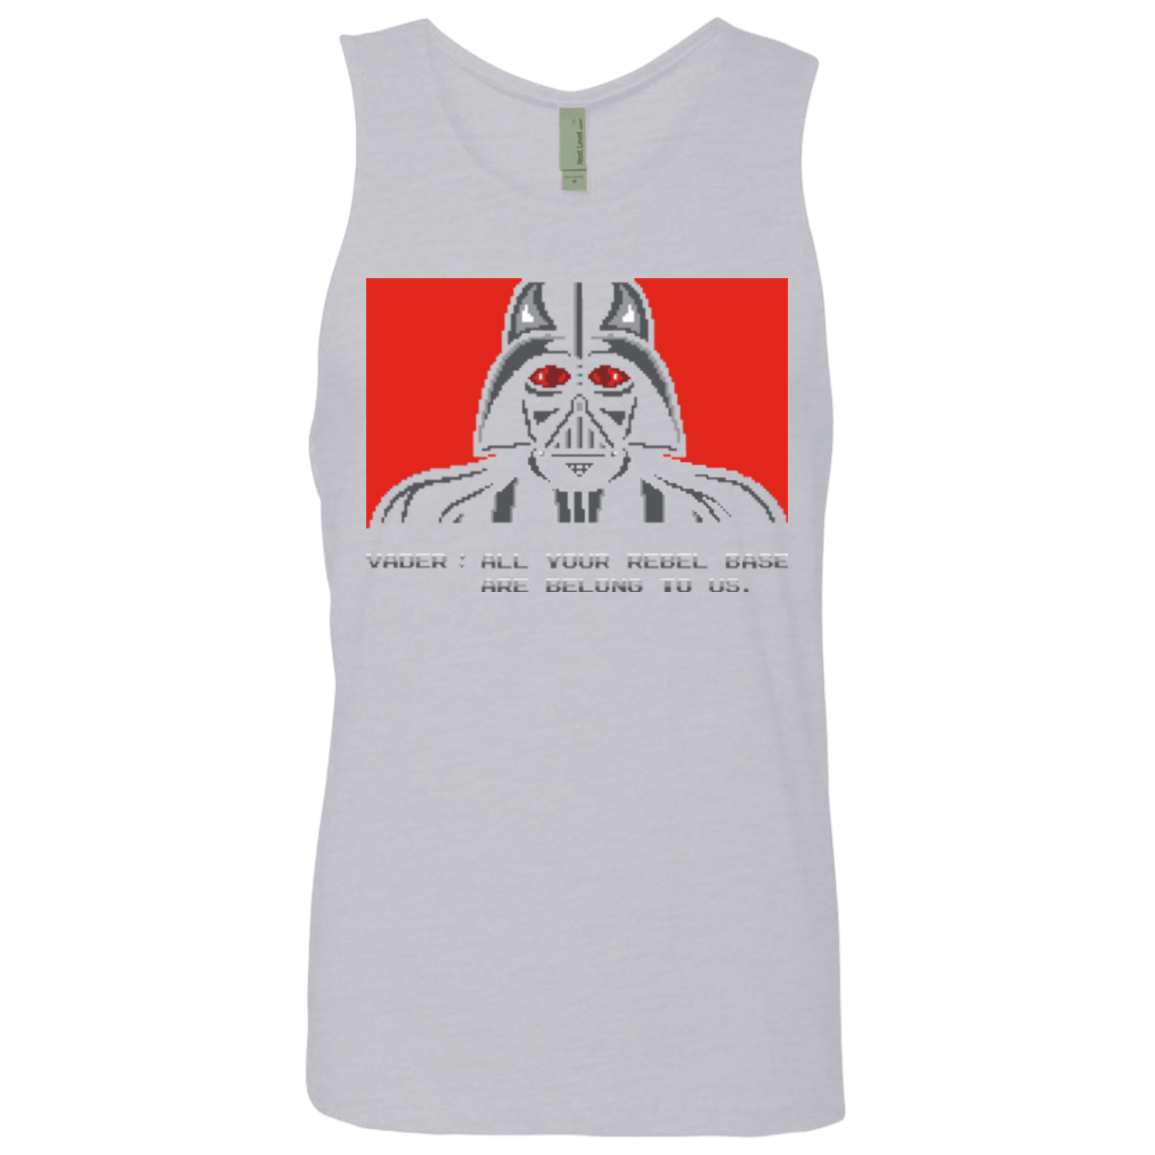 T-Shirts Heather Grey / Small All your rebel base are belongs to us Men's Premium Tank Top